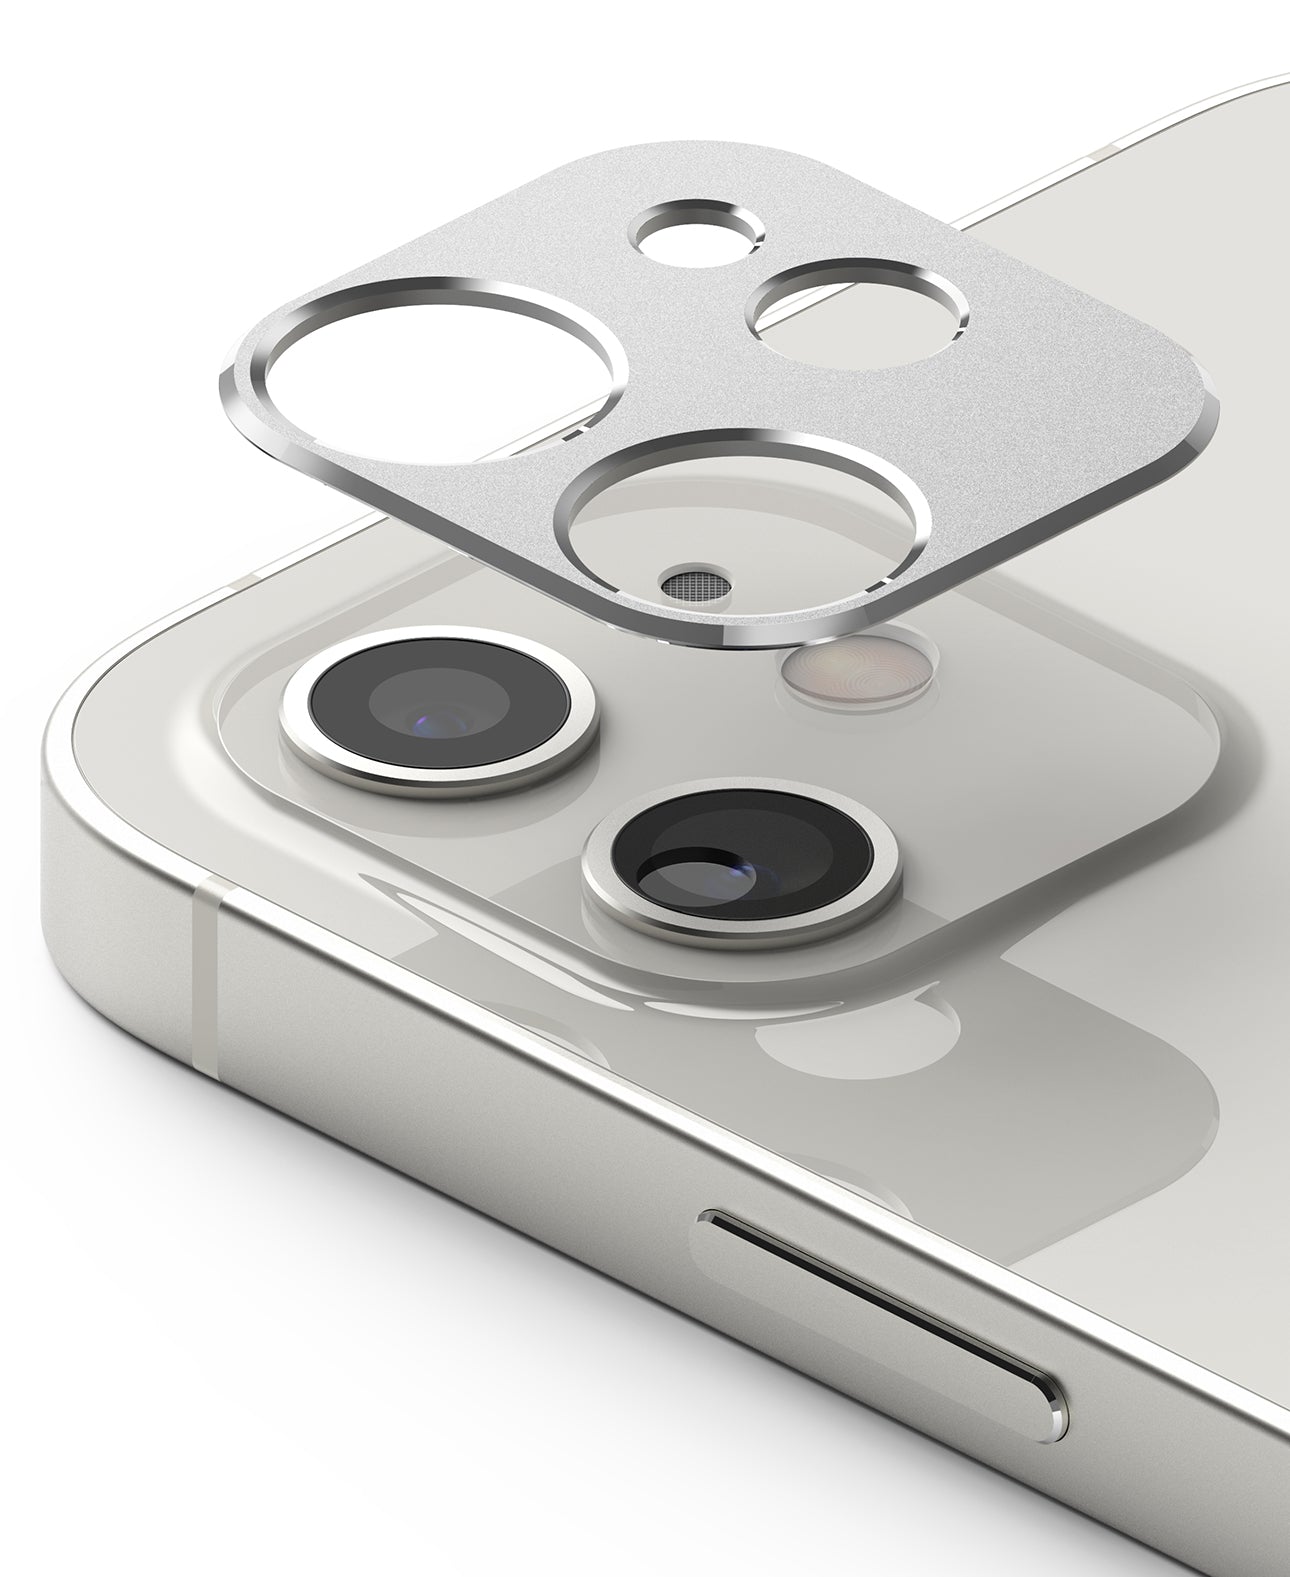 ringke camera styling for iphone 12 - silver